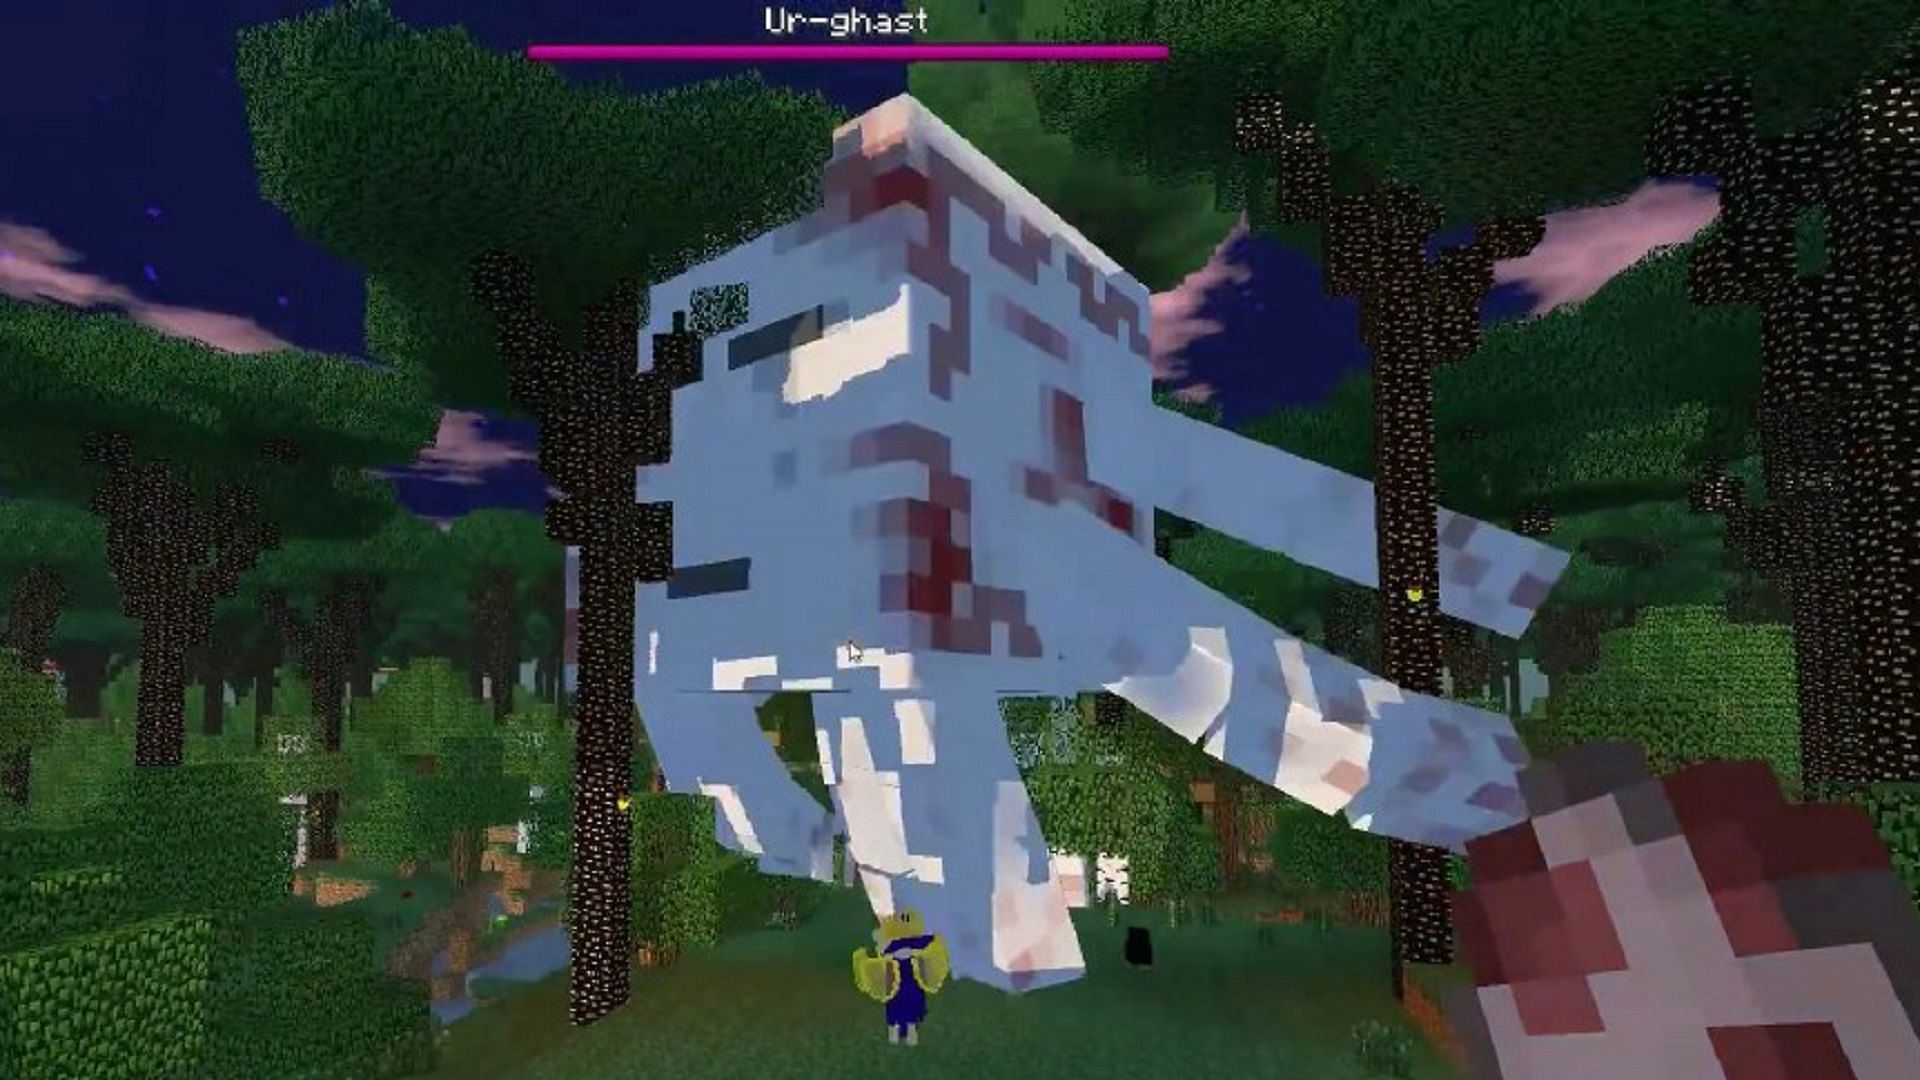 The Ur-Ghast boss found within the Twilight Forest mod (Image via Minecraft Forum)